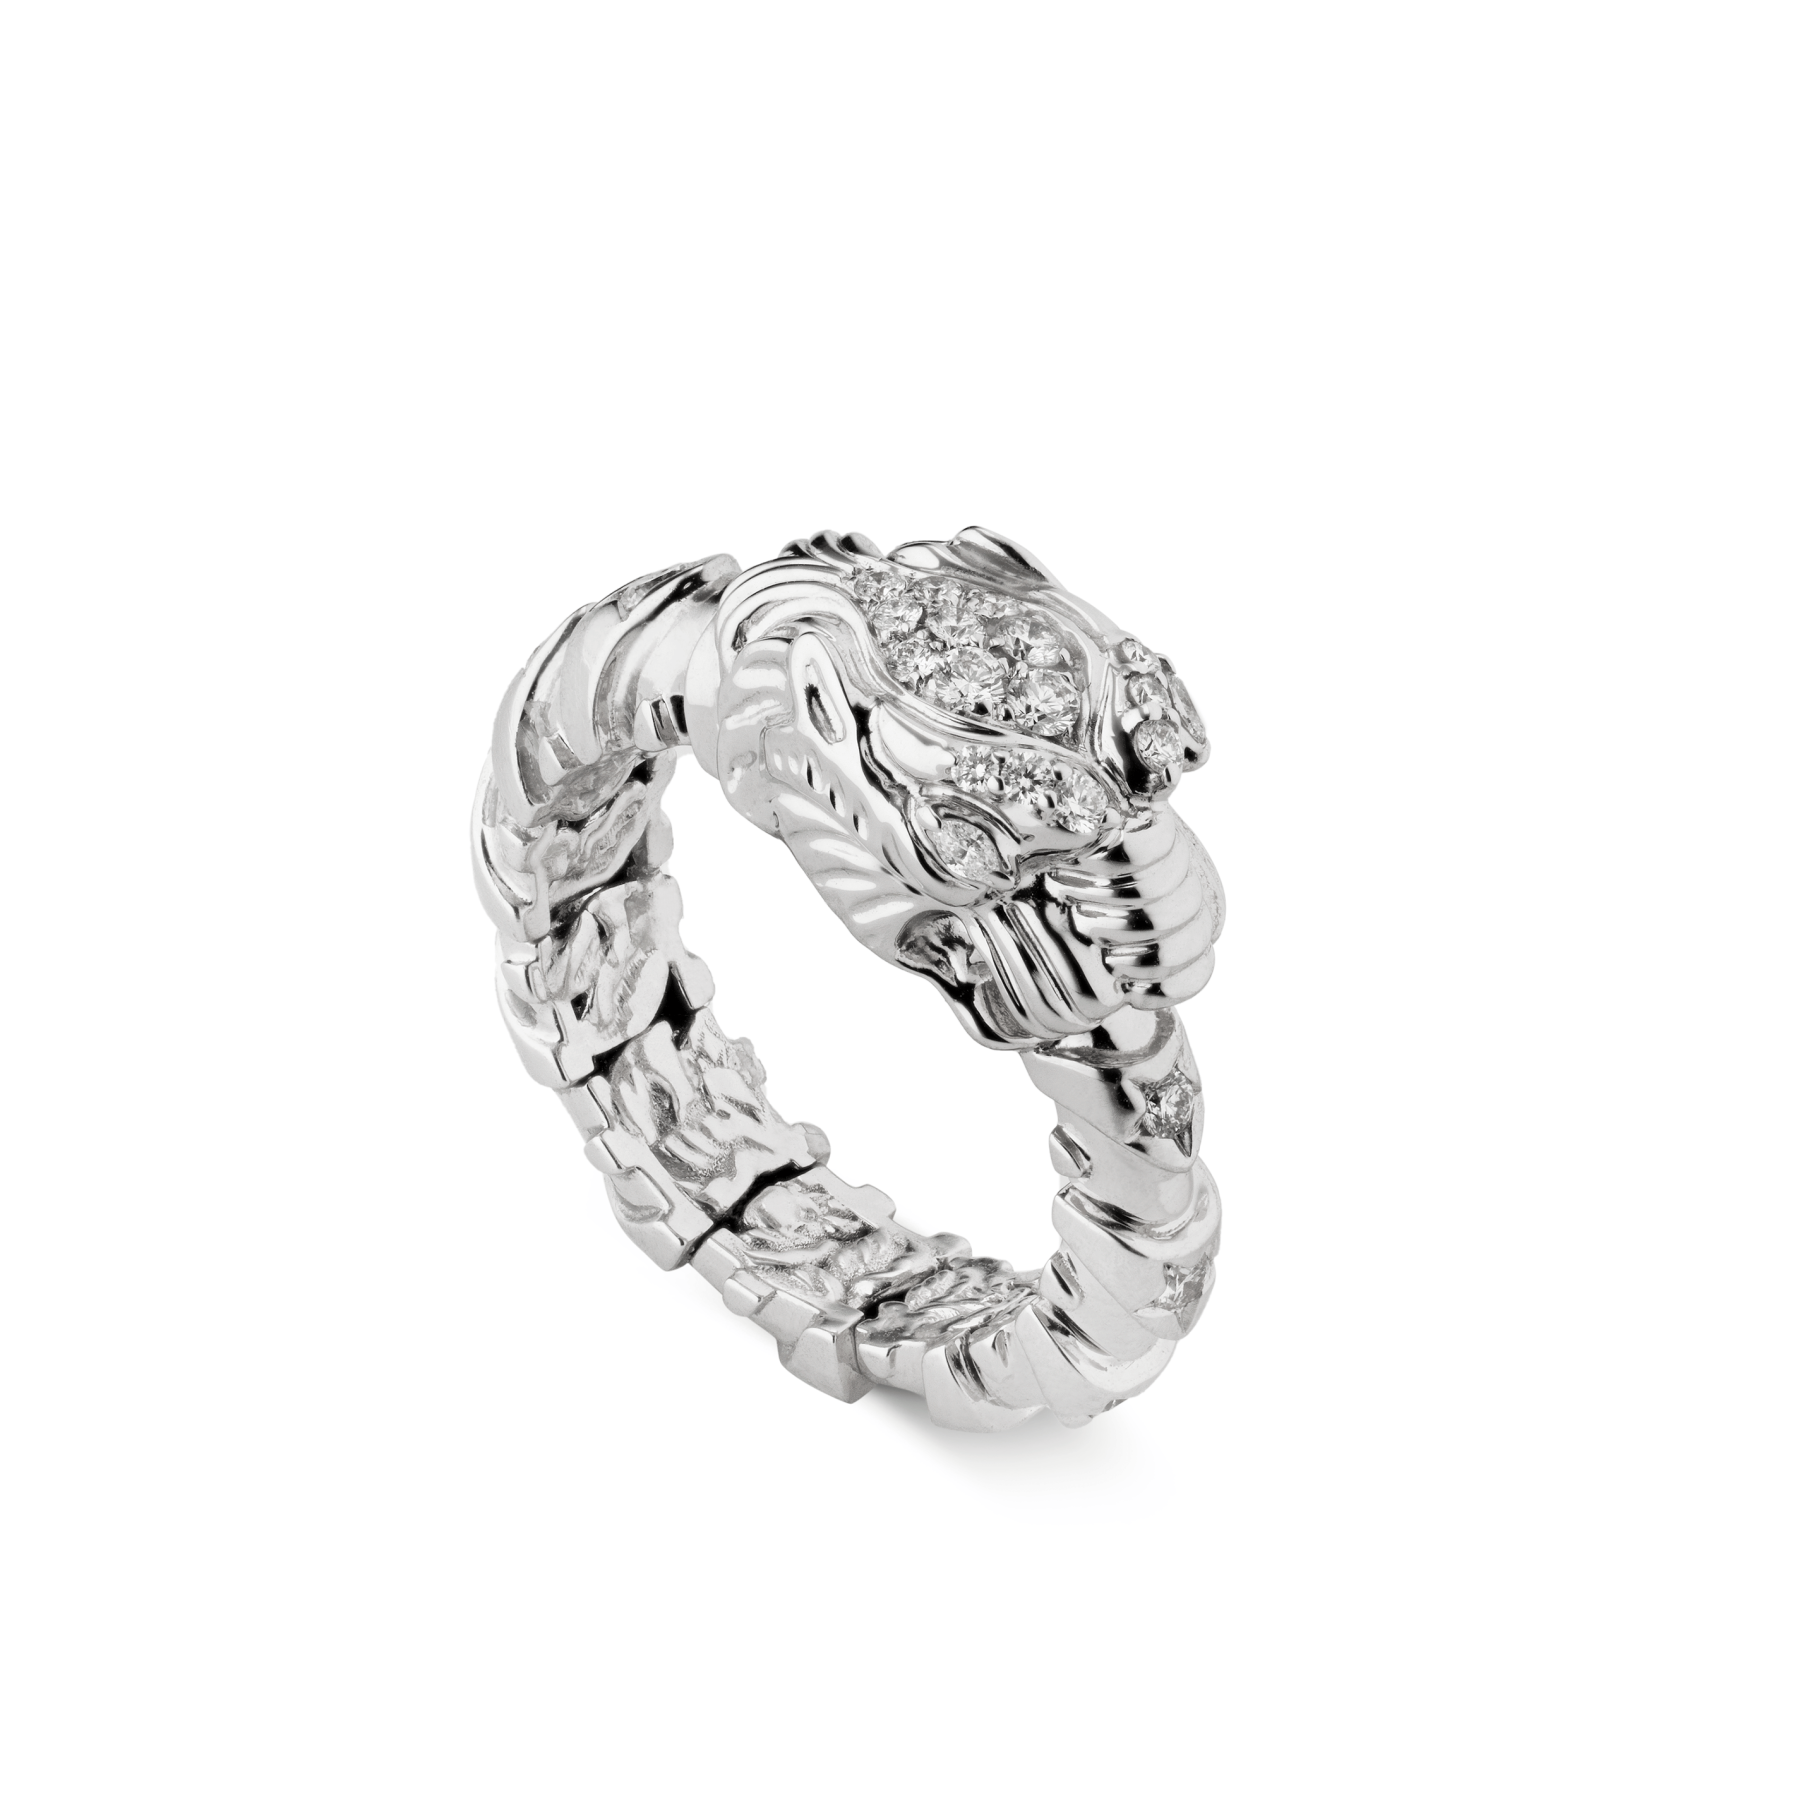 Gucci Dionysus 18K White Gold Ring with 